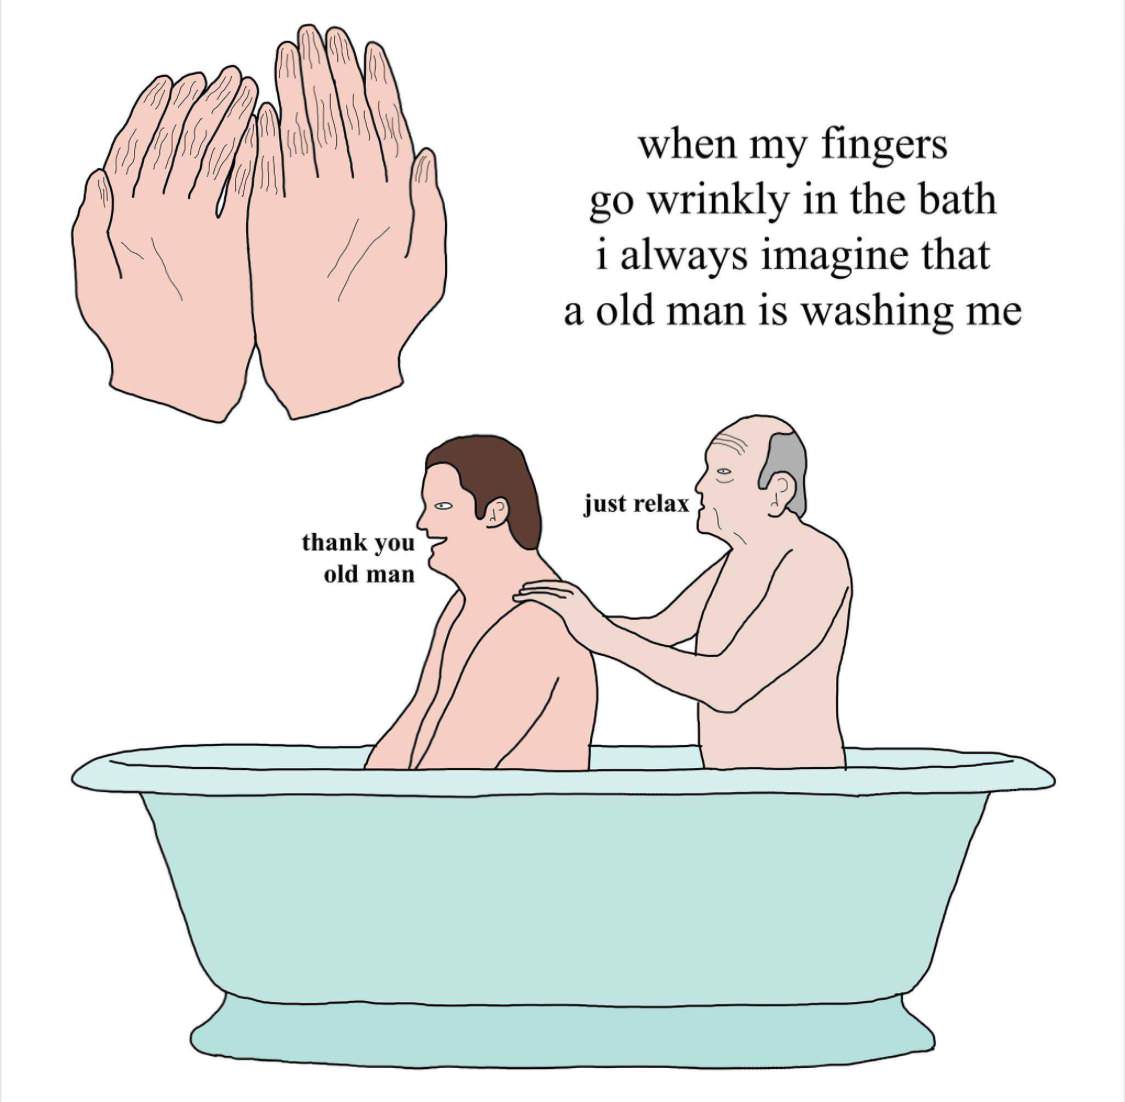 my fingers go wrinkly in the bath - when my fingers go wrinkly in the bath i always imagine that a old man is washing me just relax} thank you old man